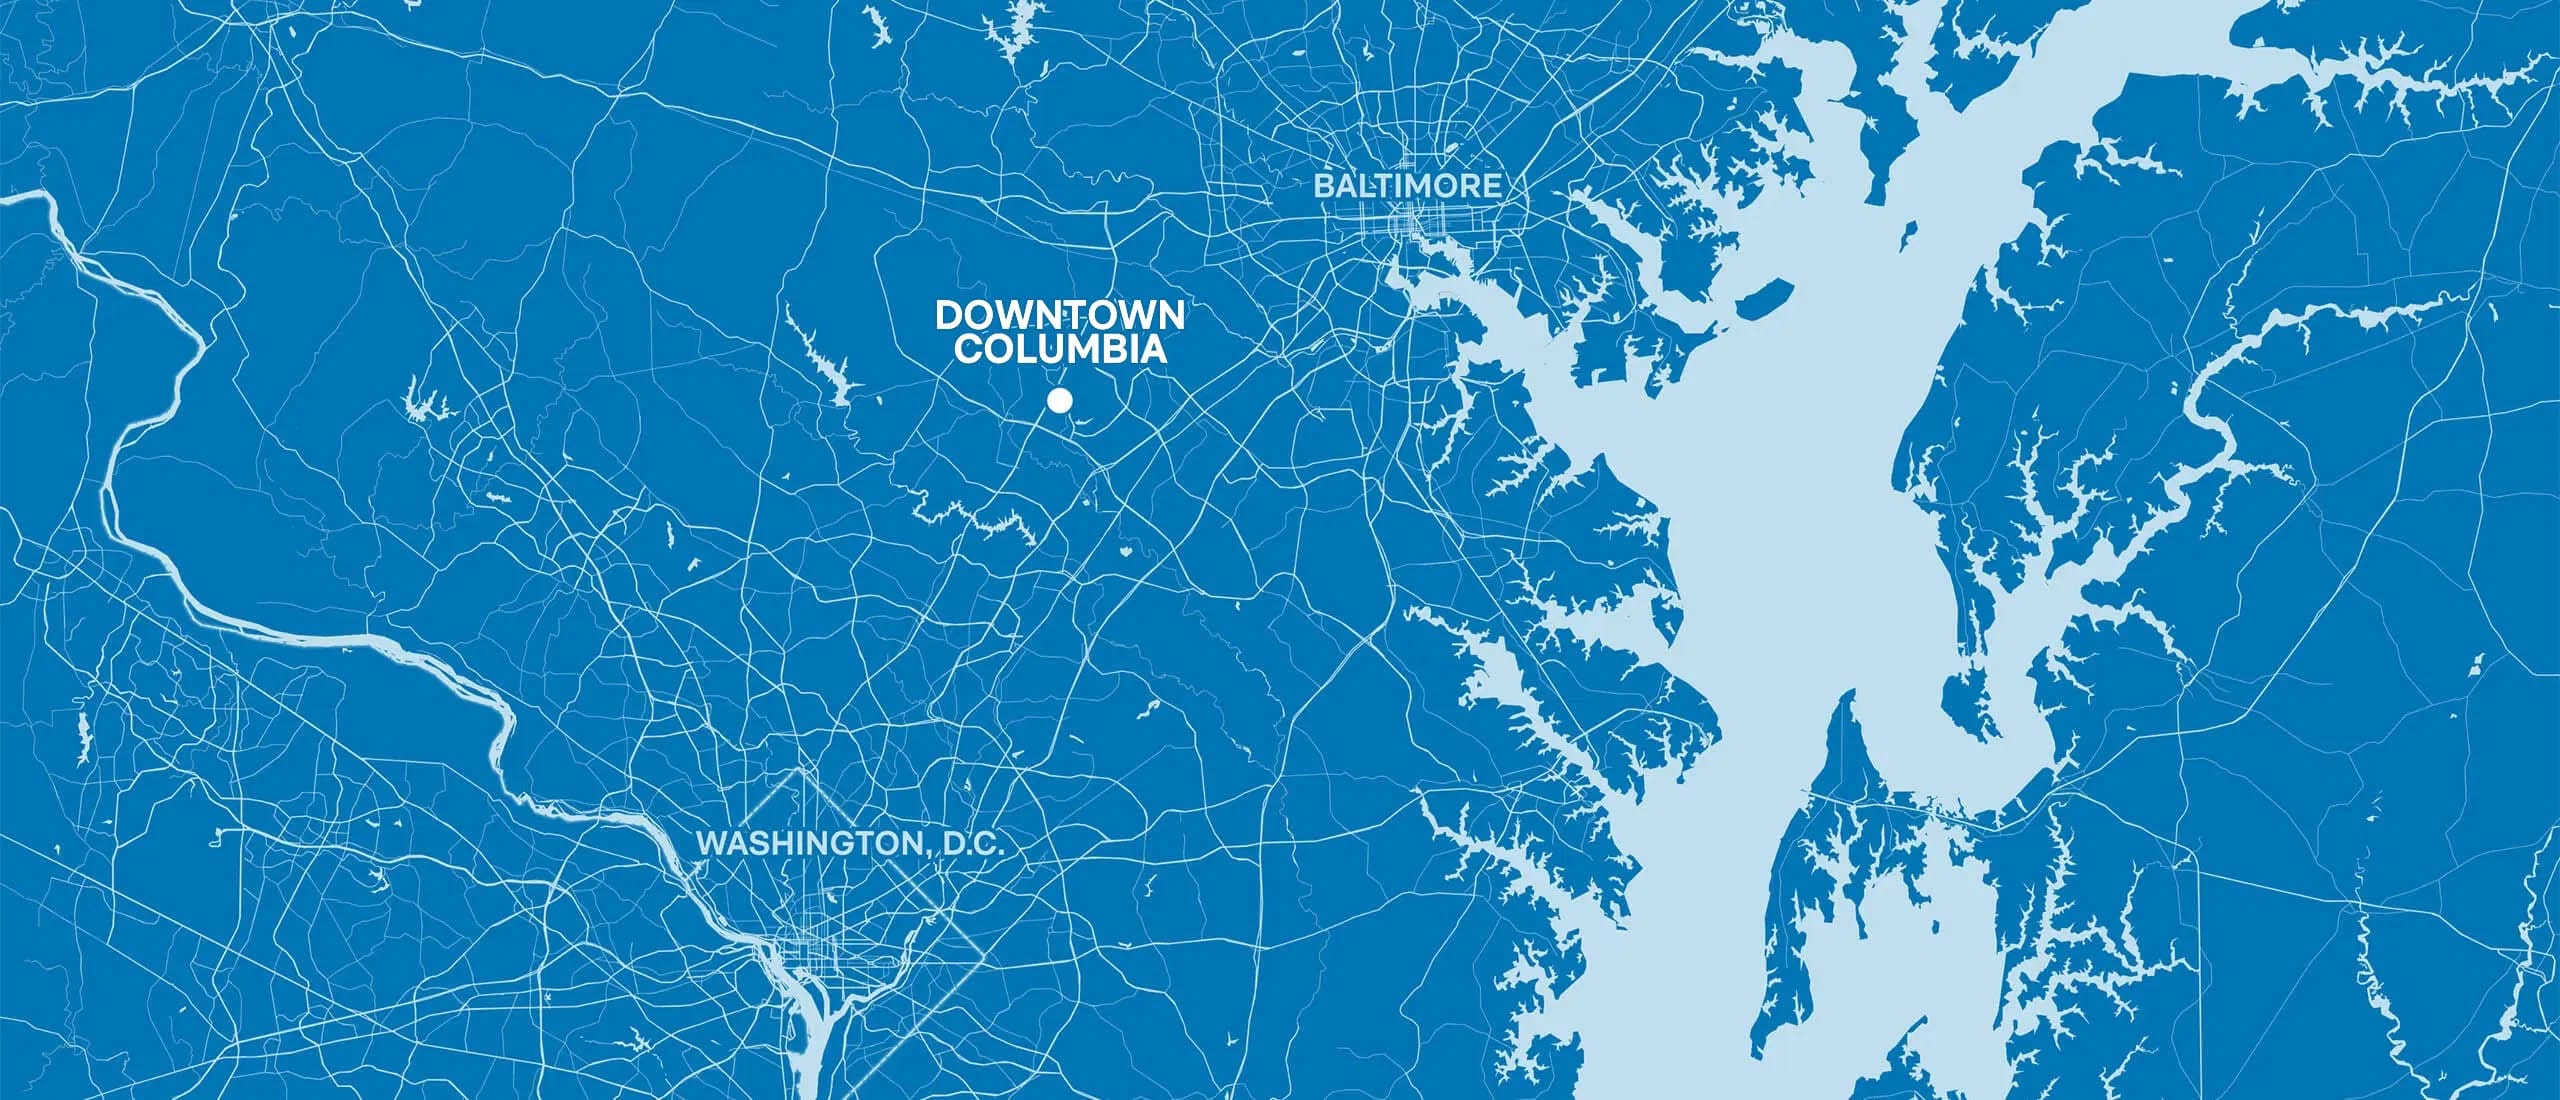 Regional map of Columbia shows close proximity and relative distance to Washington, D.C. and Baltimore.